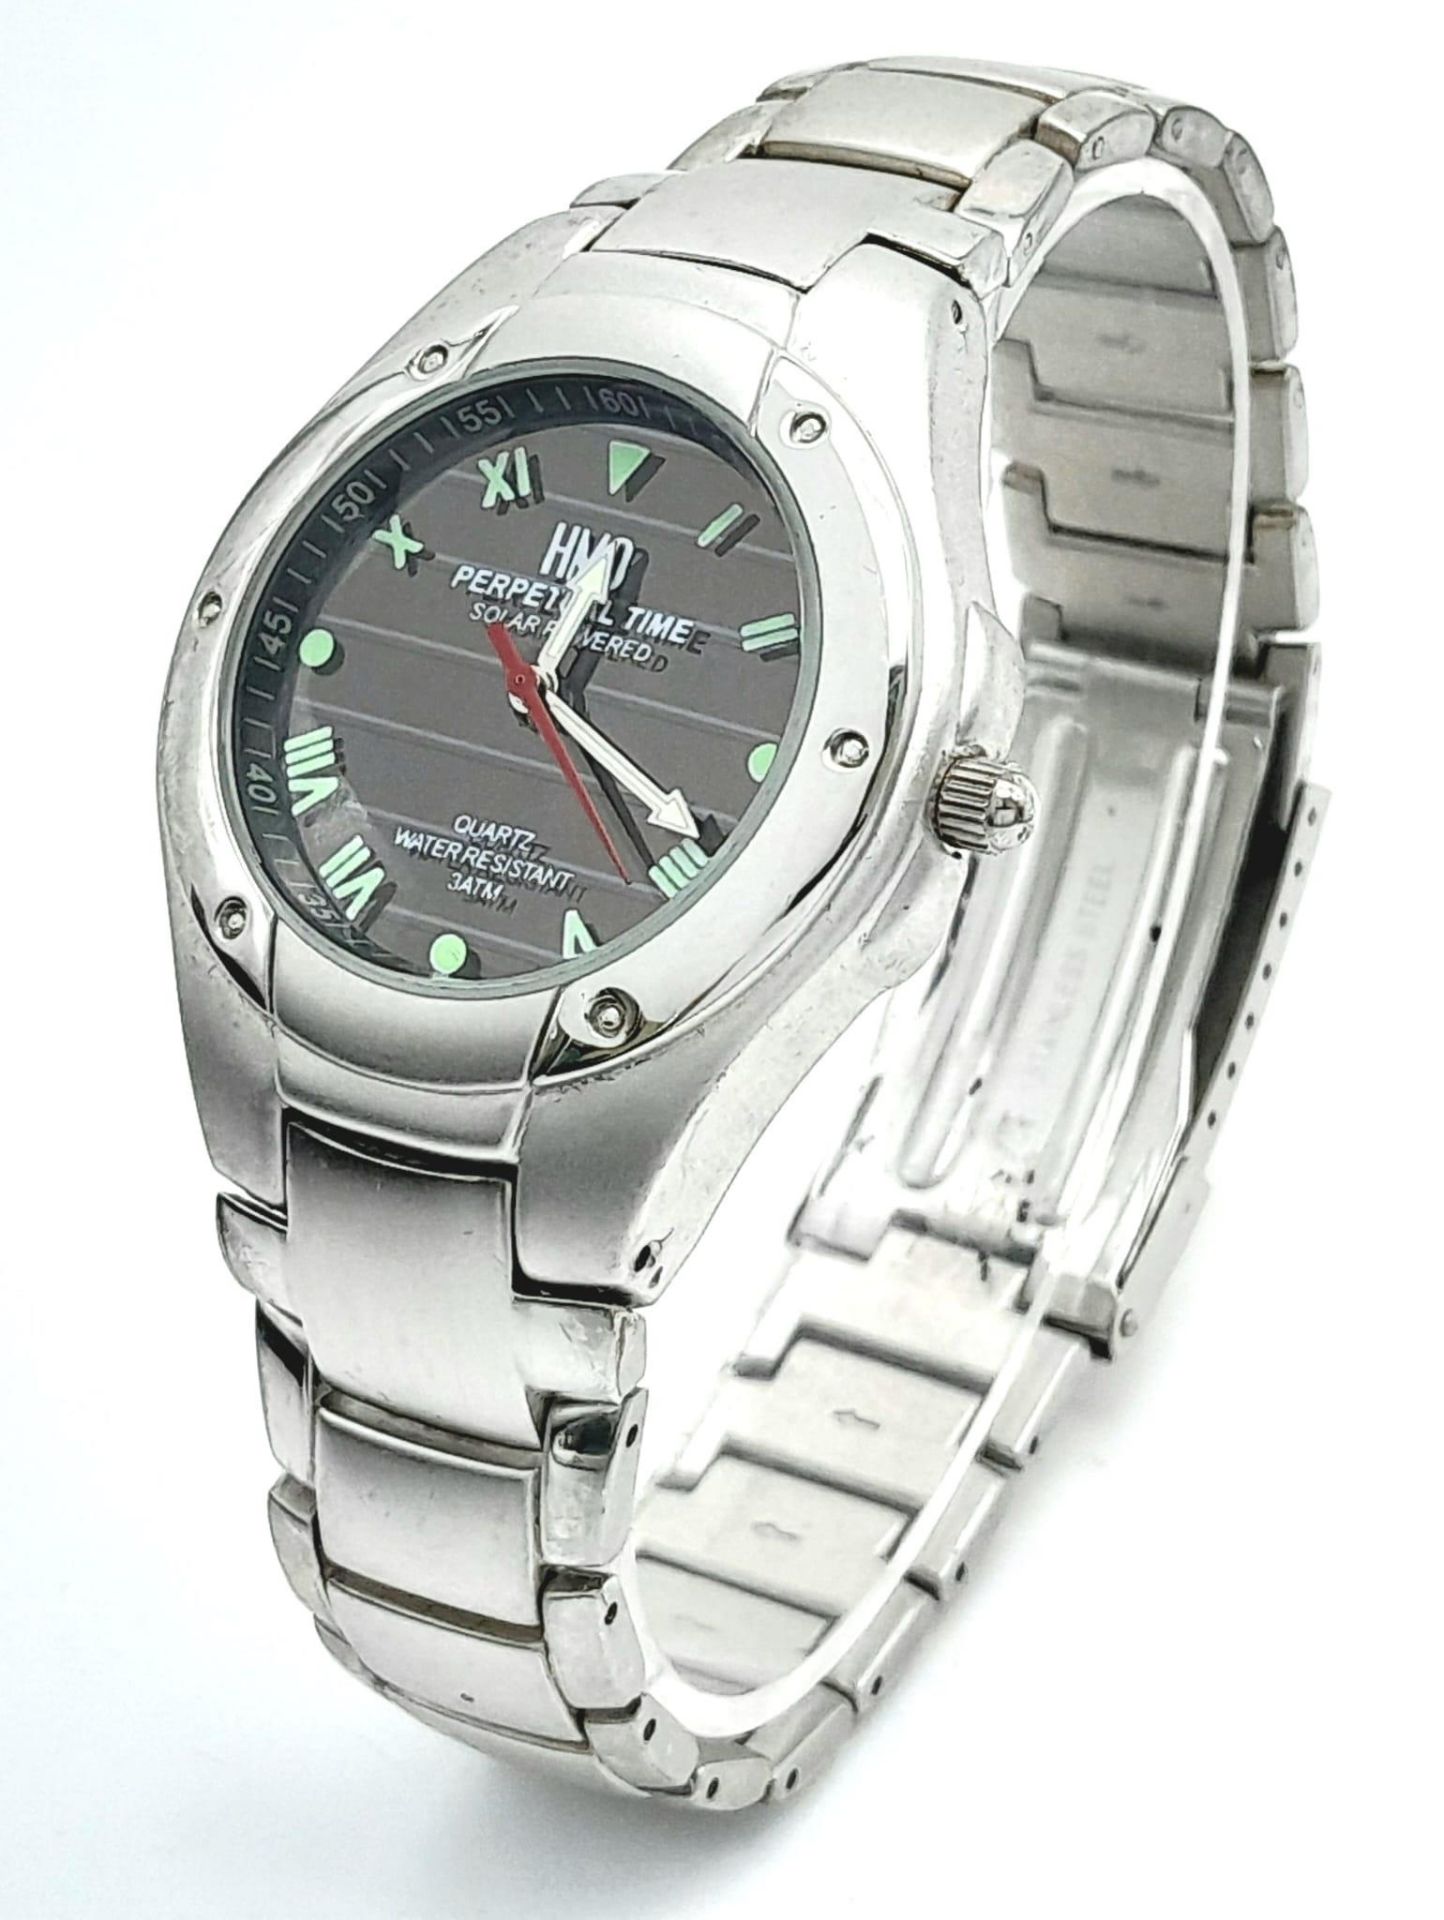 A Solar Powered Quartz Watch by HMO. Perpetual Time Model. 42mm Including Crown. Full Working Order.